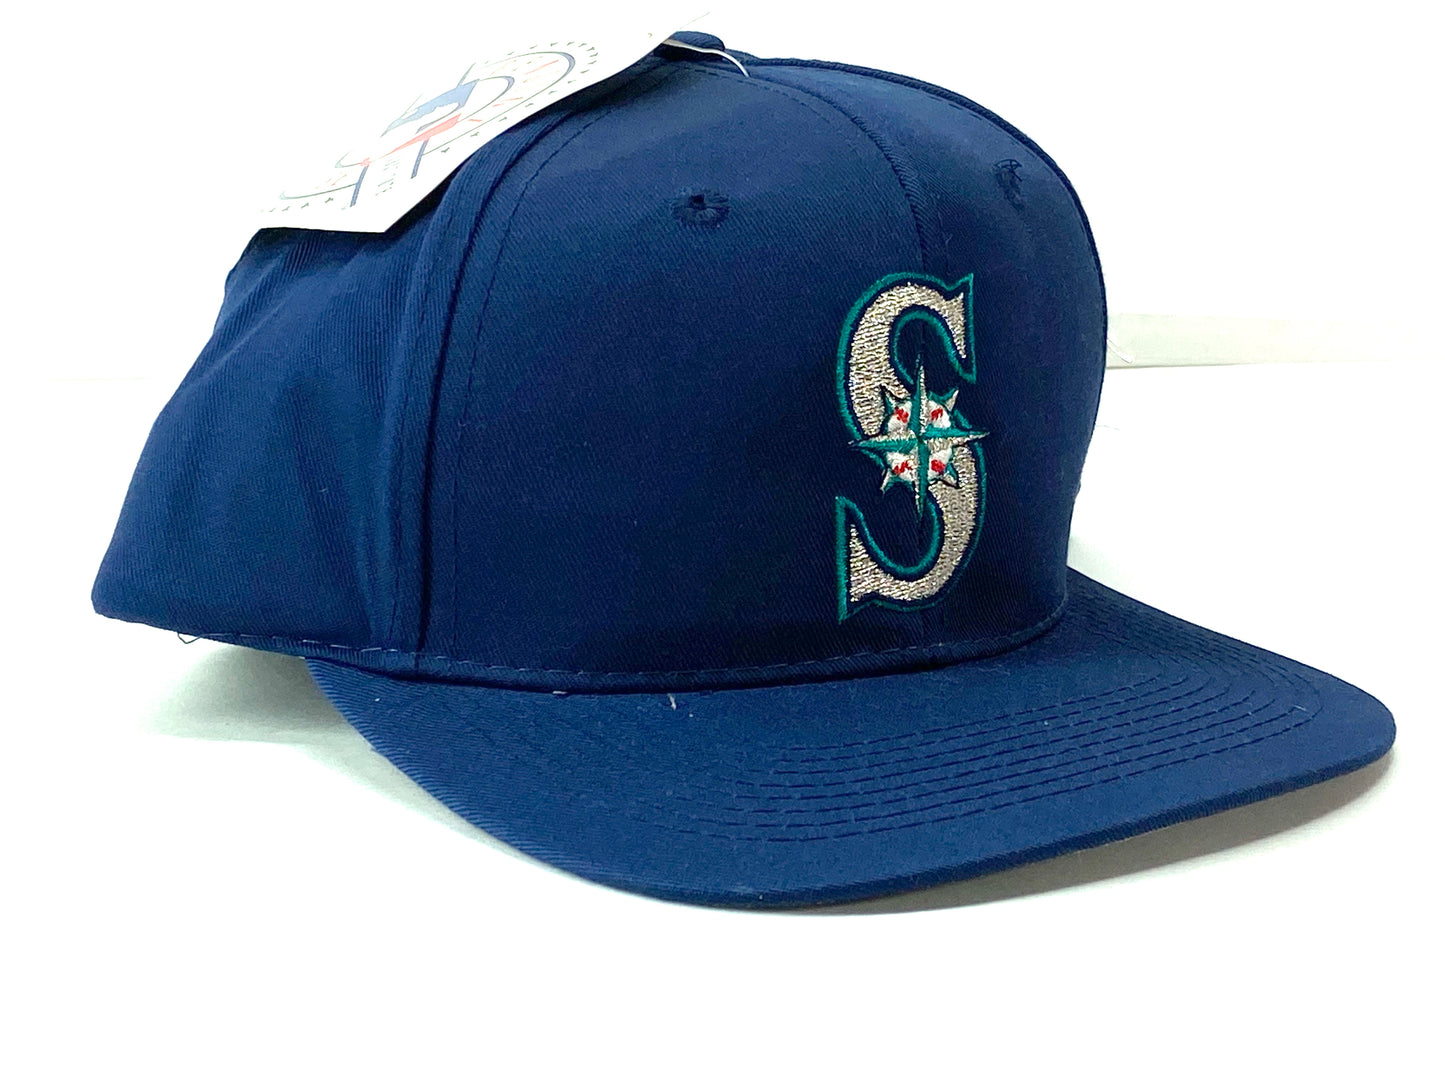 Seattle Mariners Vintage MLB Replica Snapback NOS by Drew Pearson Marketing